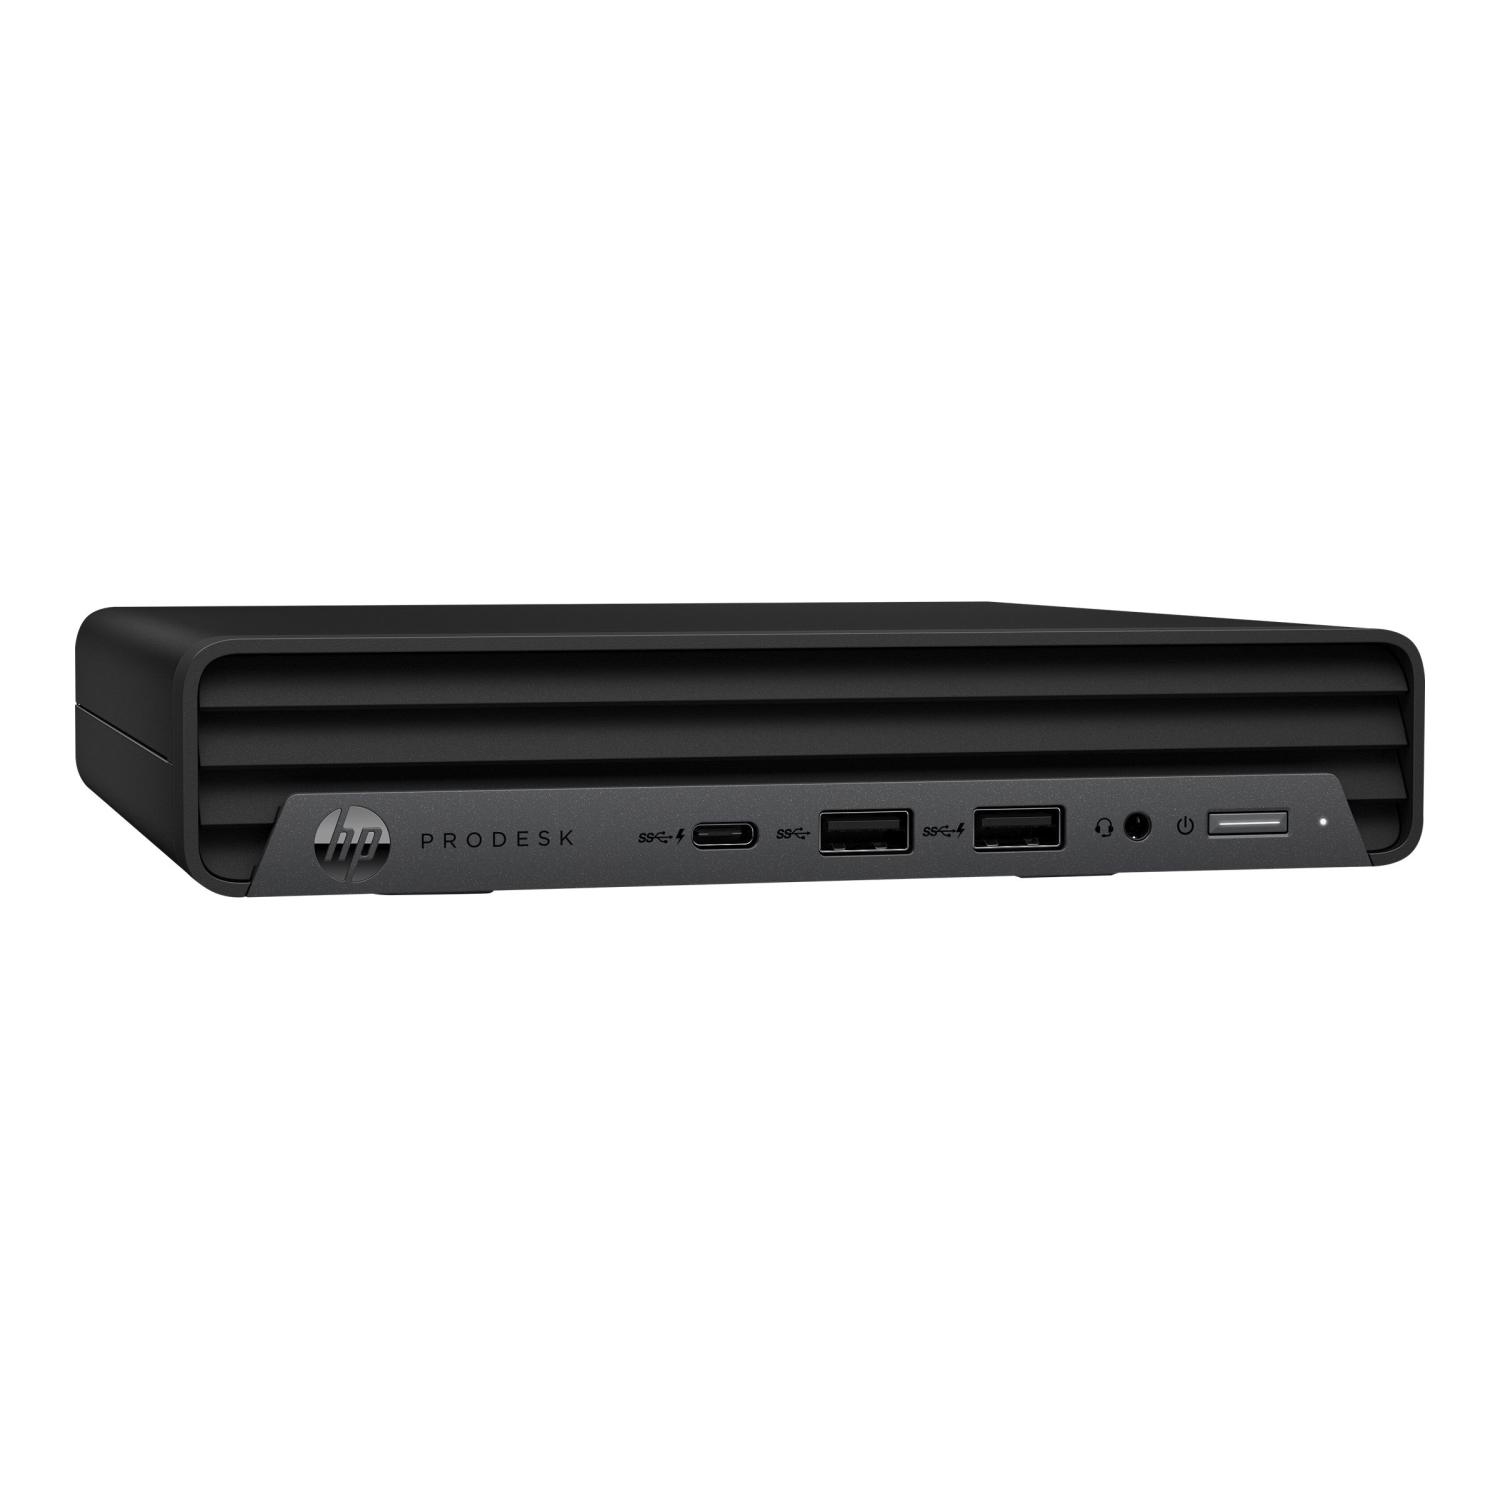 Refurbished (Excellent) - HP ProDesk 600 G6 Mini PC, Intel Core i5-10th Gen. 2.3GHz, 16GB RAM, 256GB NVMe Windows 11 Pro. (Keyboard/Mouse not included)